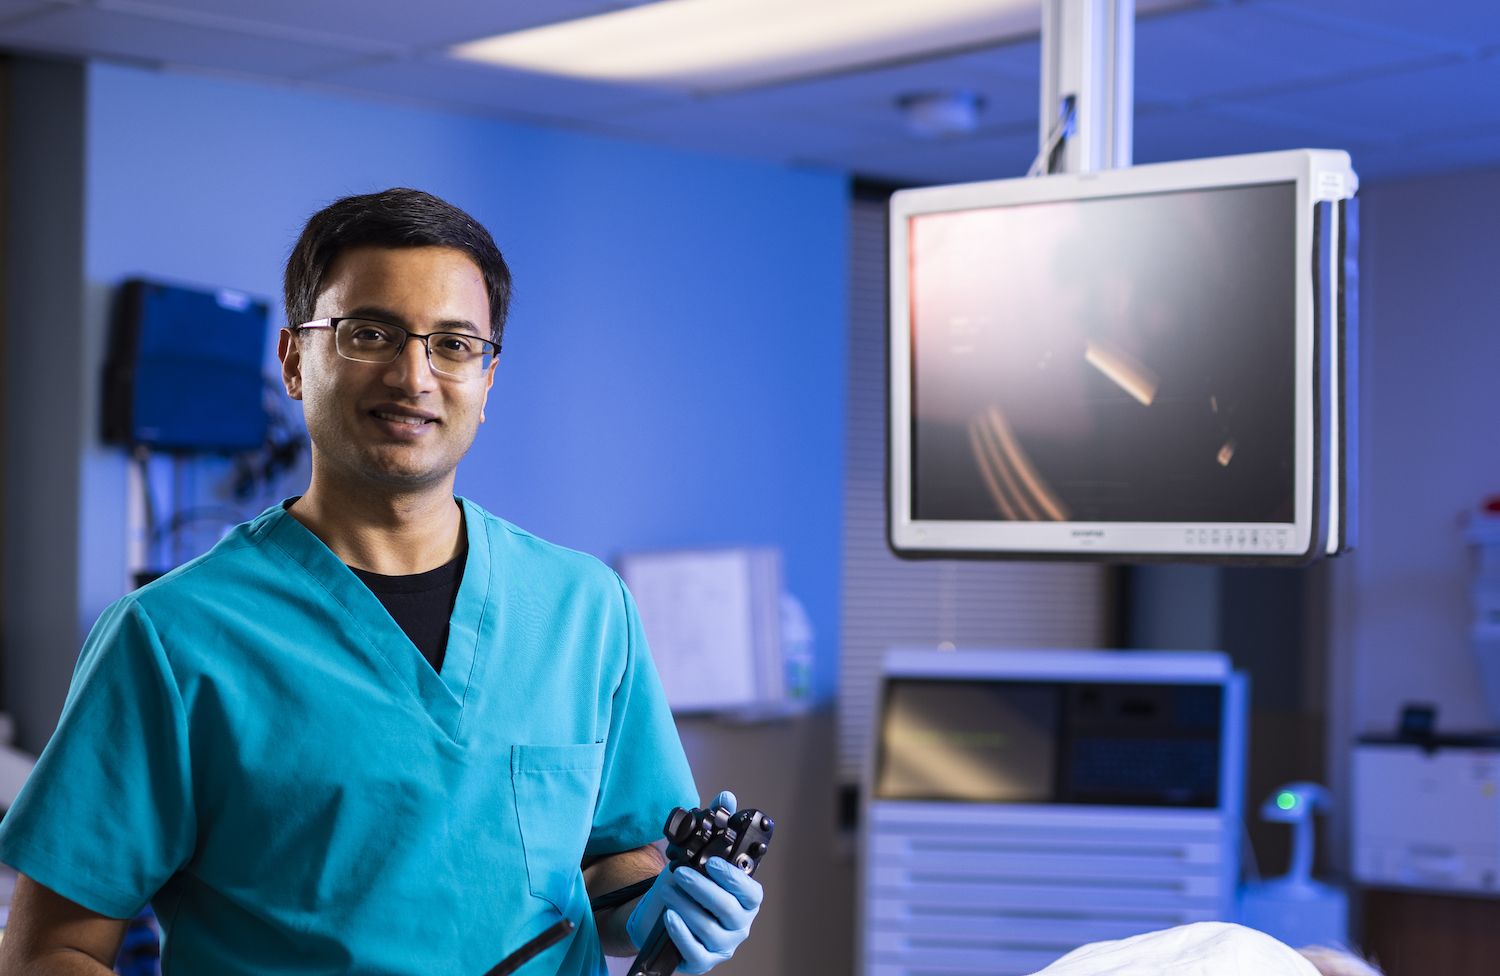 Dr. Sarvepalli performs a screening for GERD